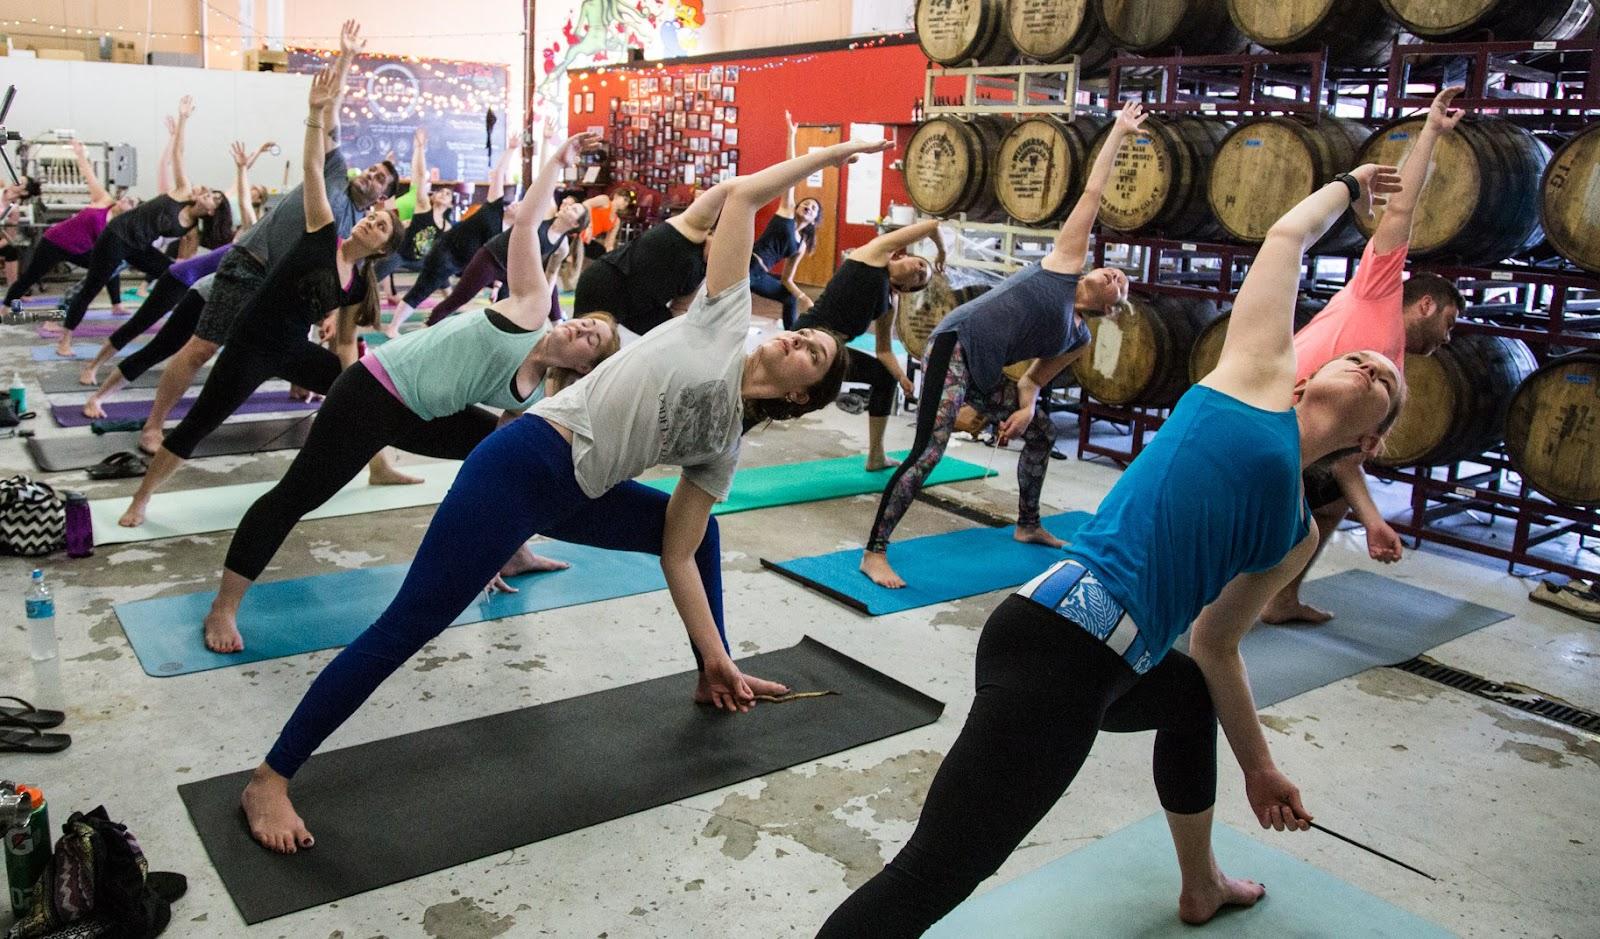 A group of women gracefully practicing yoga in the vibrant ambiance of a brewery, creating a harmonious blend of relaxation and social enjoyment. The serene setting captures the essence of wellness and community in a unique brewery experience.